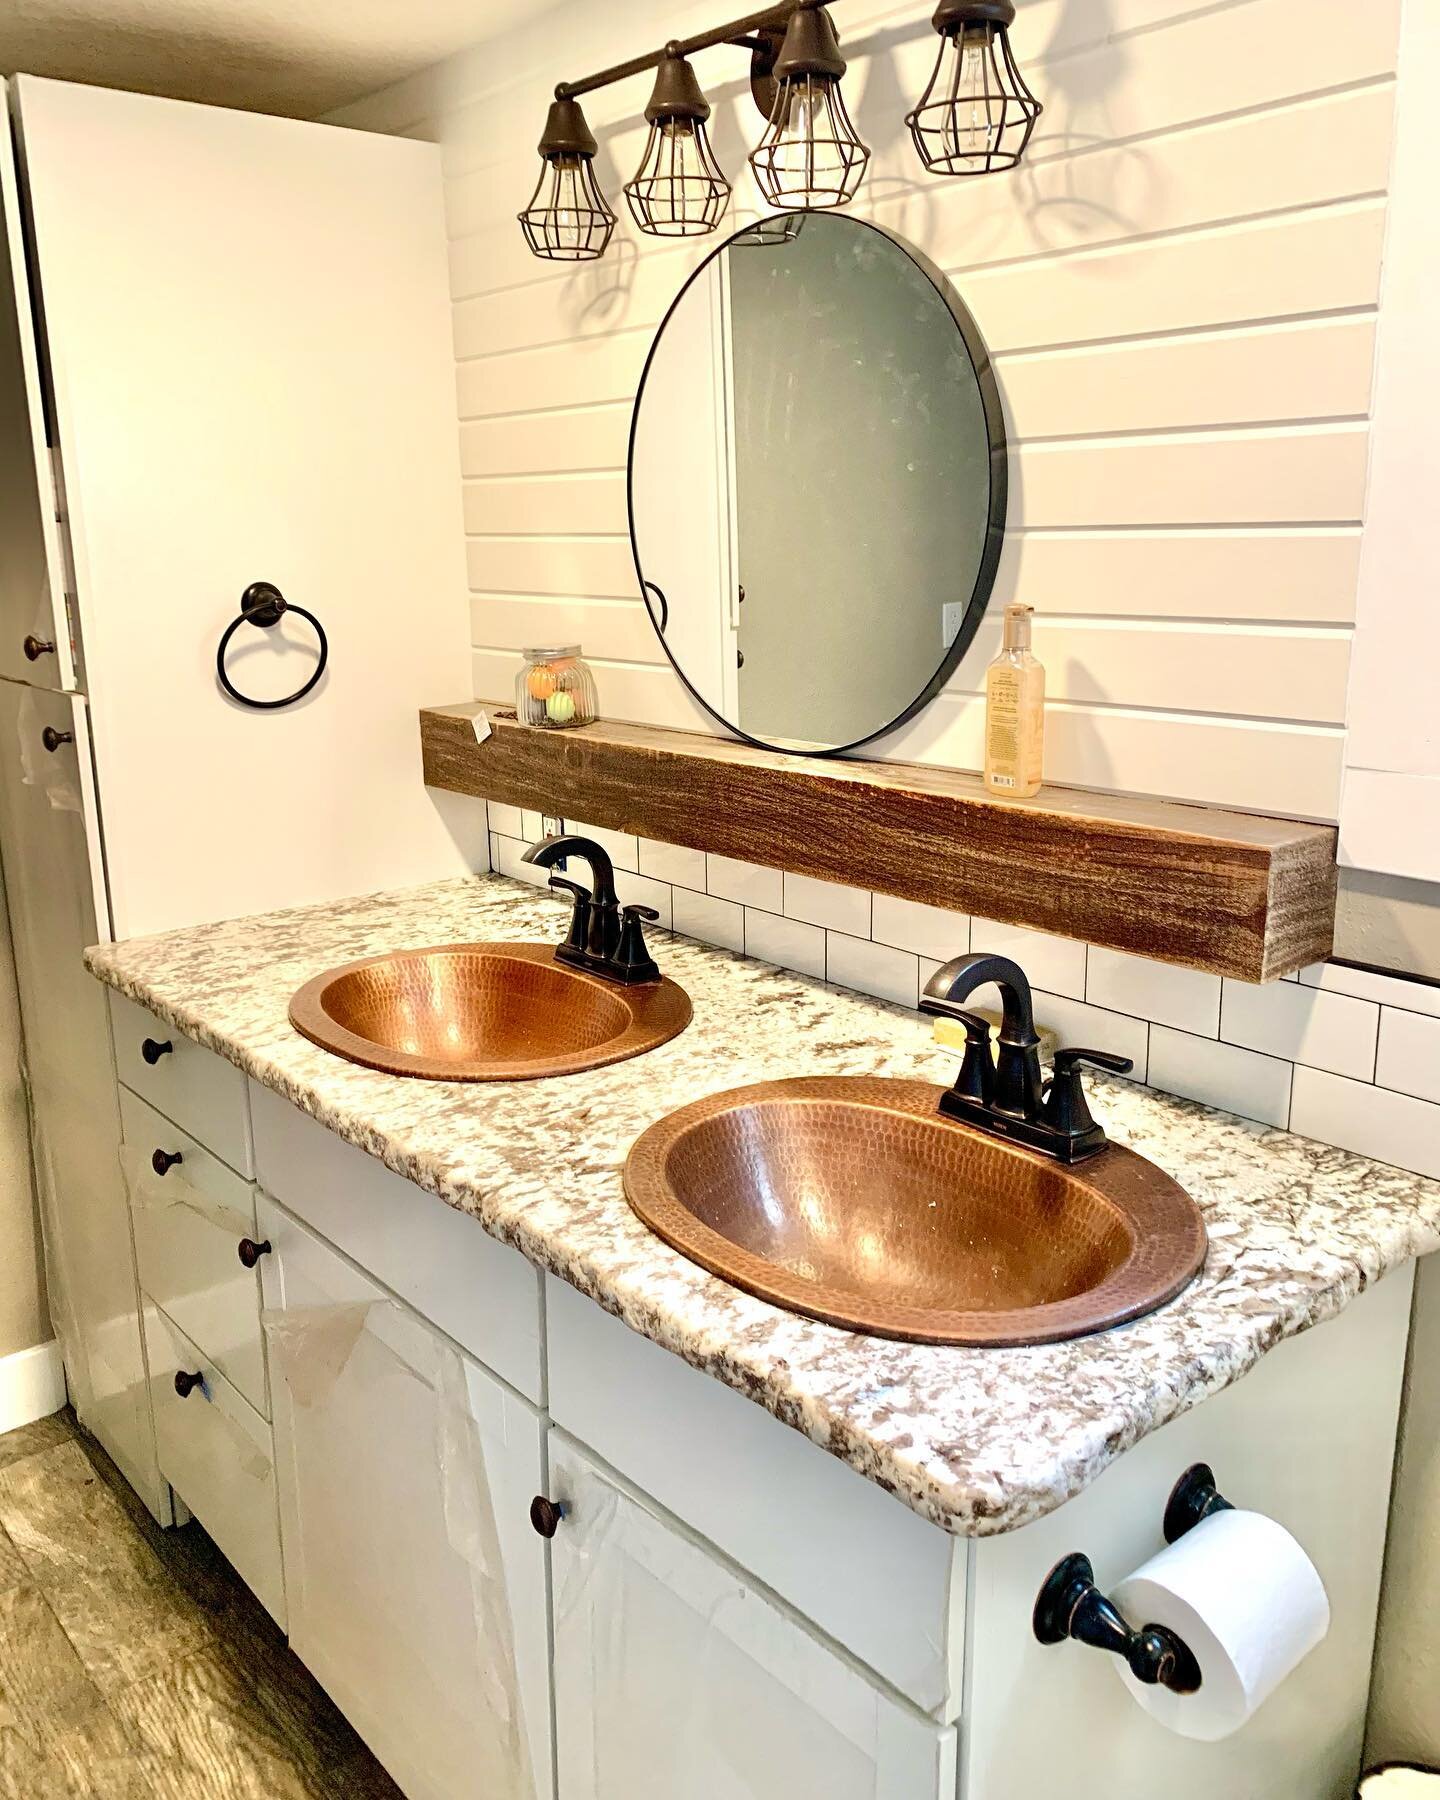 A little throw back to another fun bathroom we completed with copper basin sinks and floating wood shelving.

#websterconstruction #bathroomremodel #idahoremodel #copper #homereno #idahome